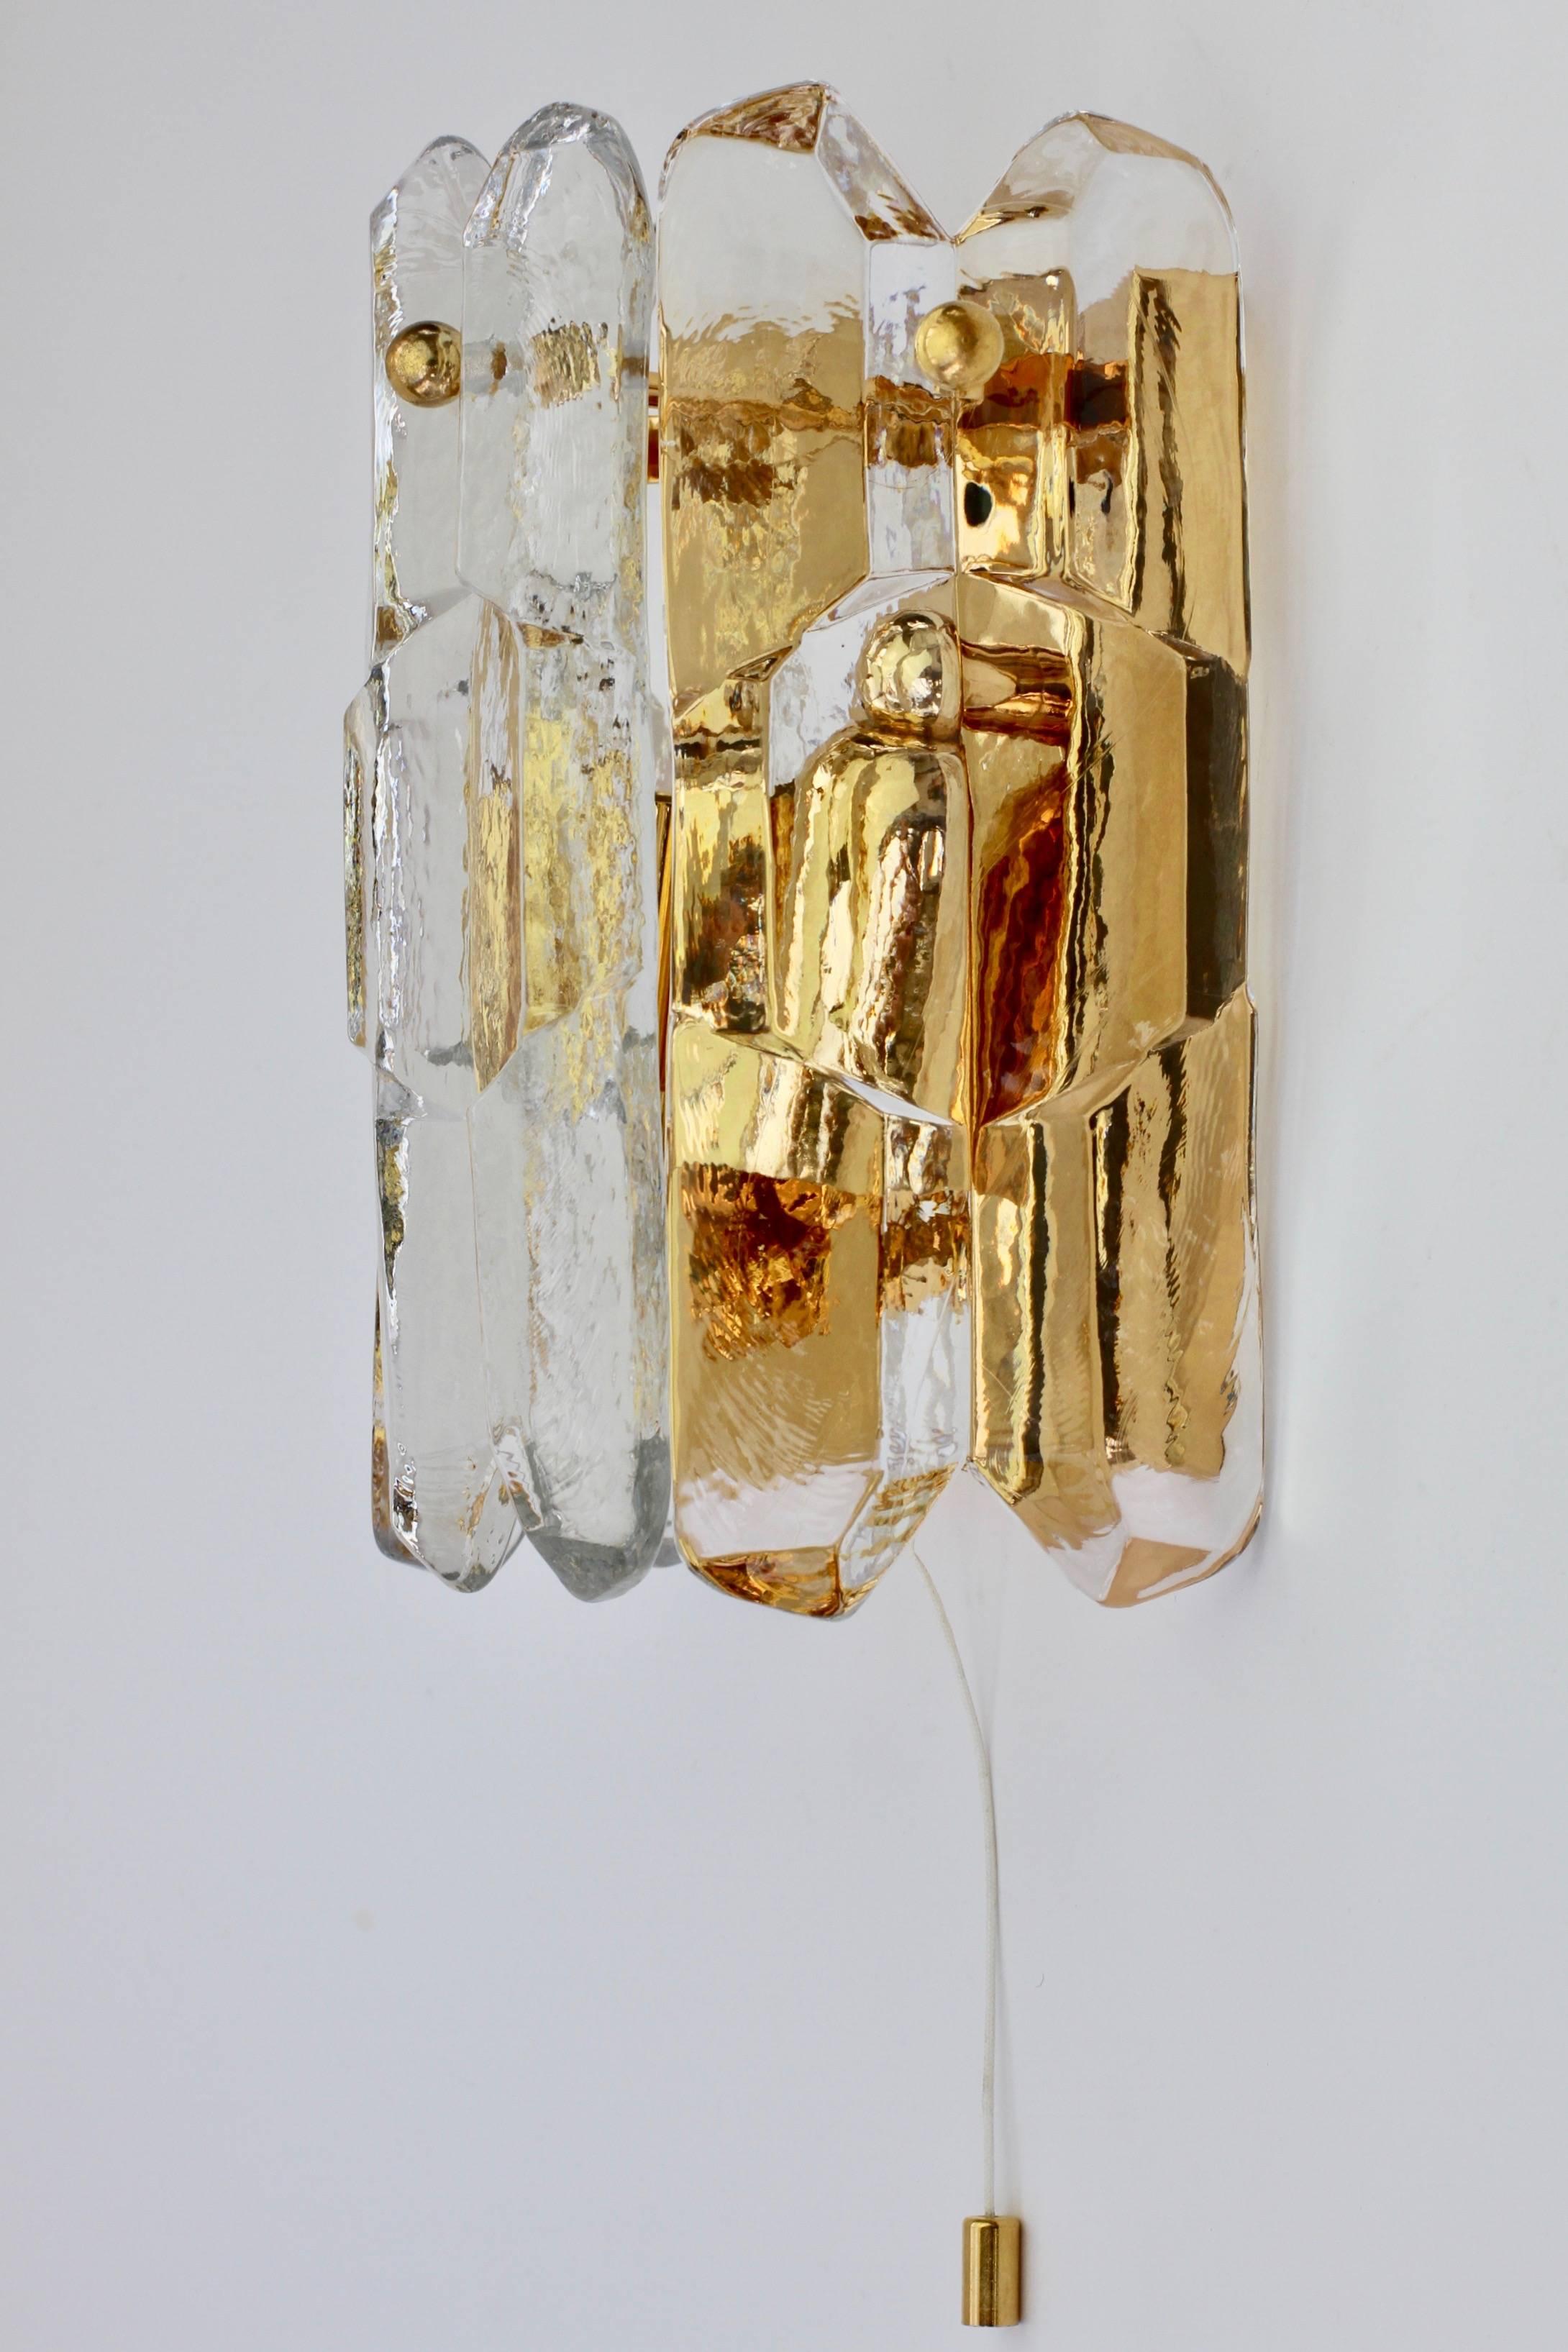 Exceptionally rare, 'new old stock' Austrian made 'Palazzo' ice crystal glass wall sconce or lamp by Kalmar, circa 1960. Featuring three hanging glass elements resembling melting ice crystals suspended from a 24-carat gold-plated brass mount or